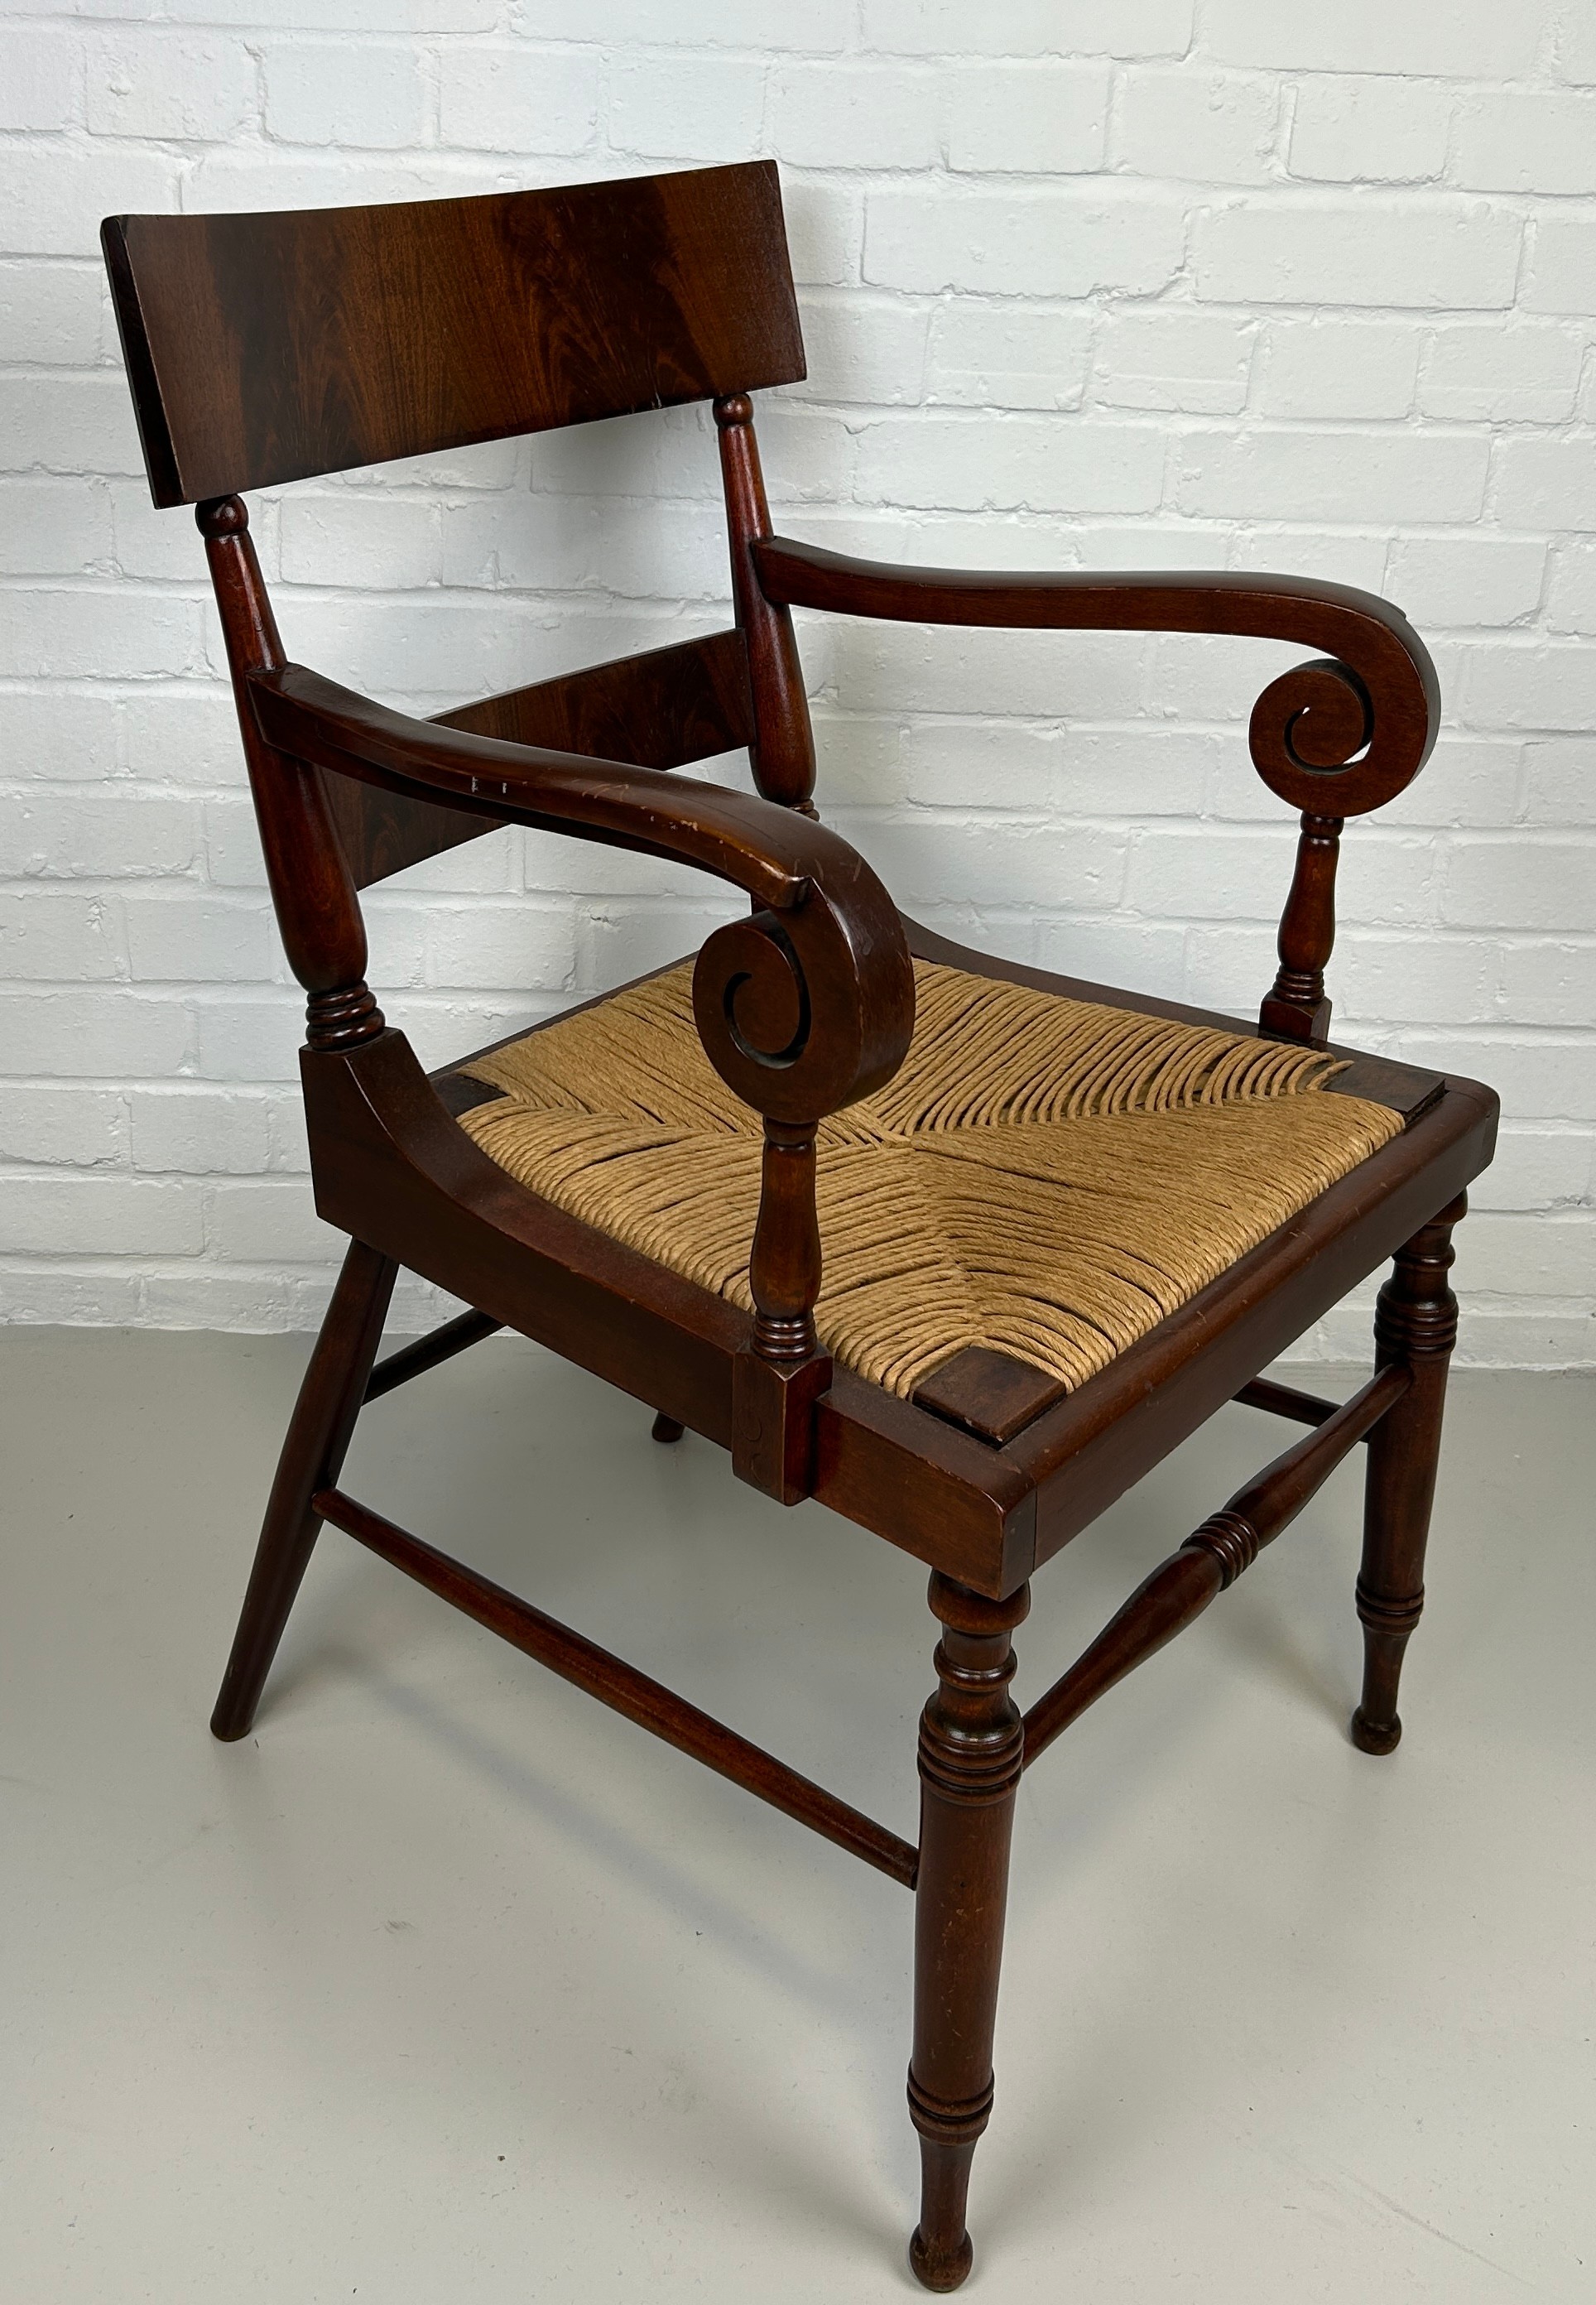 AN EARLY 20TH CENTURY ARMCHAIR OR DESK CHAIR, Flame mahogany with scroll arms and cane upholstered